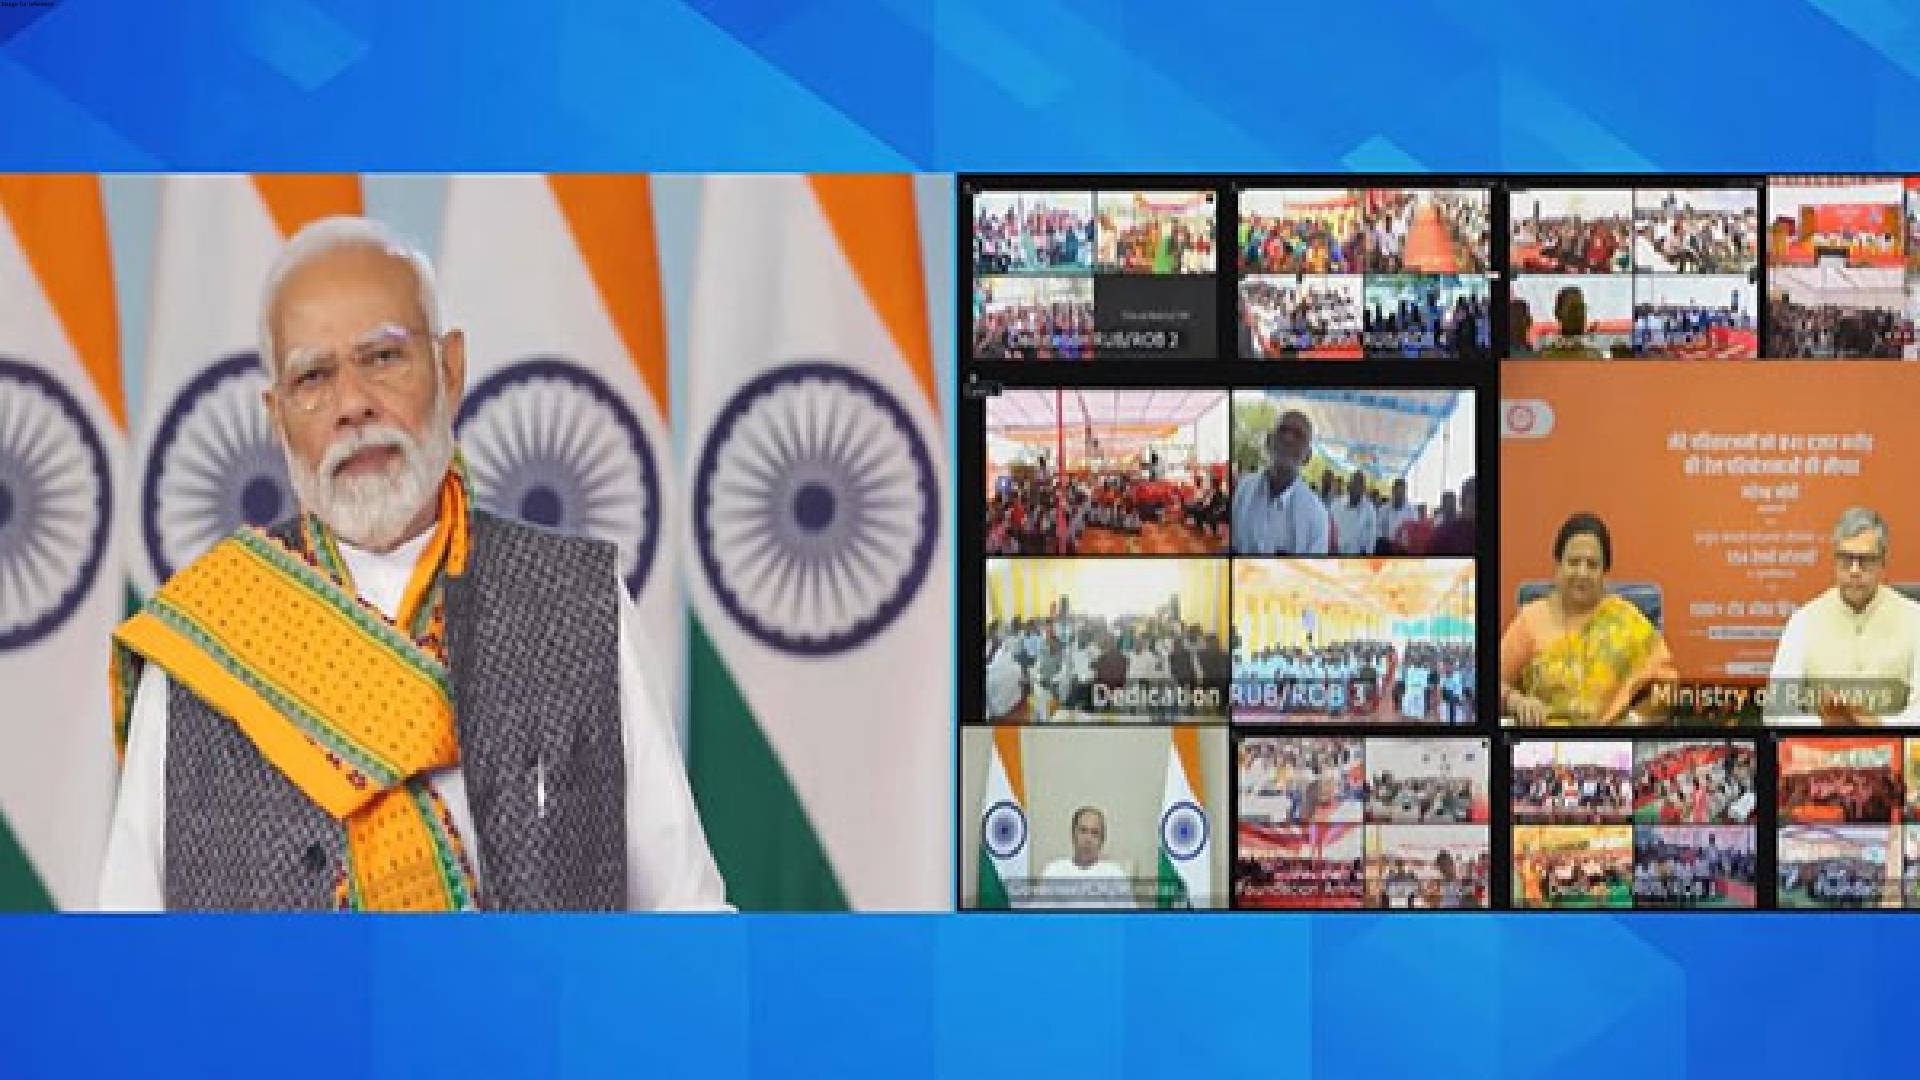 PM Modi virtually inaugurates, dedicates to nation over 2000 Rail infra projects worth around Rs 41,000 cr